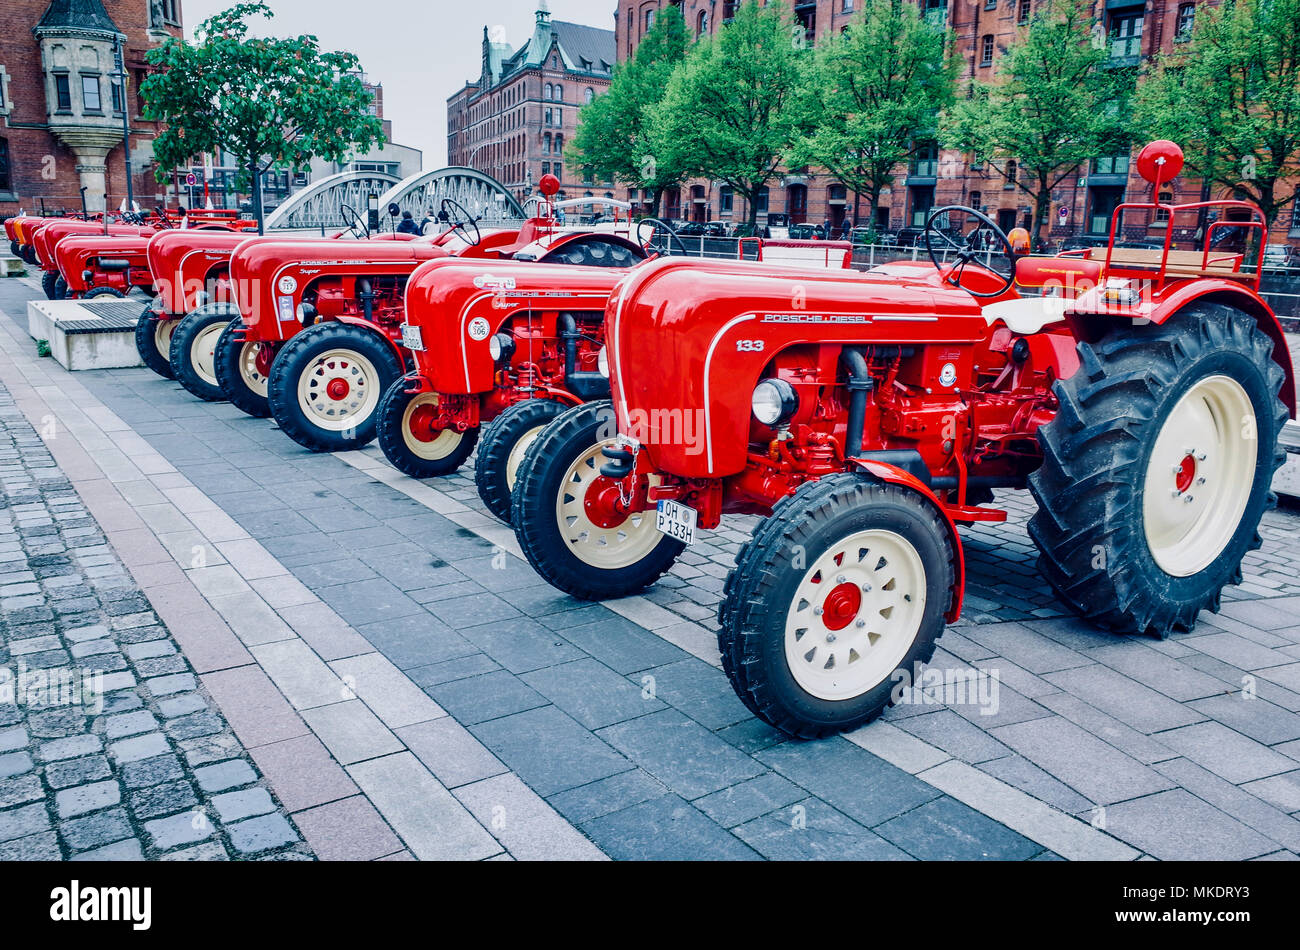 Porsche Diesel Tractors lined up in a display in the HafenCity port area of Hamburg Stock Photo